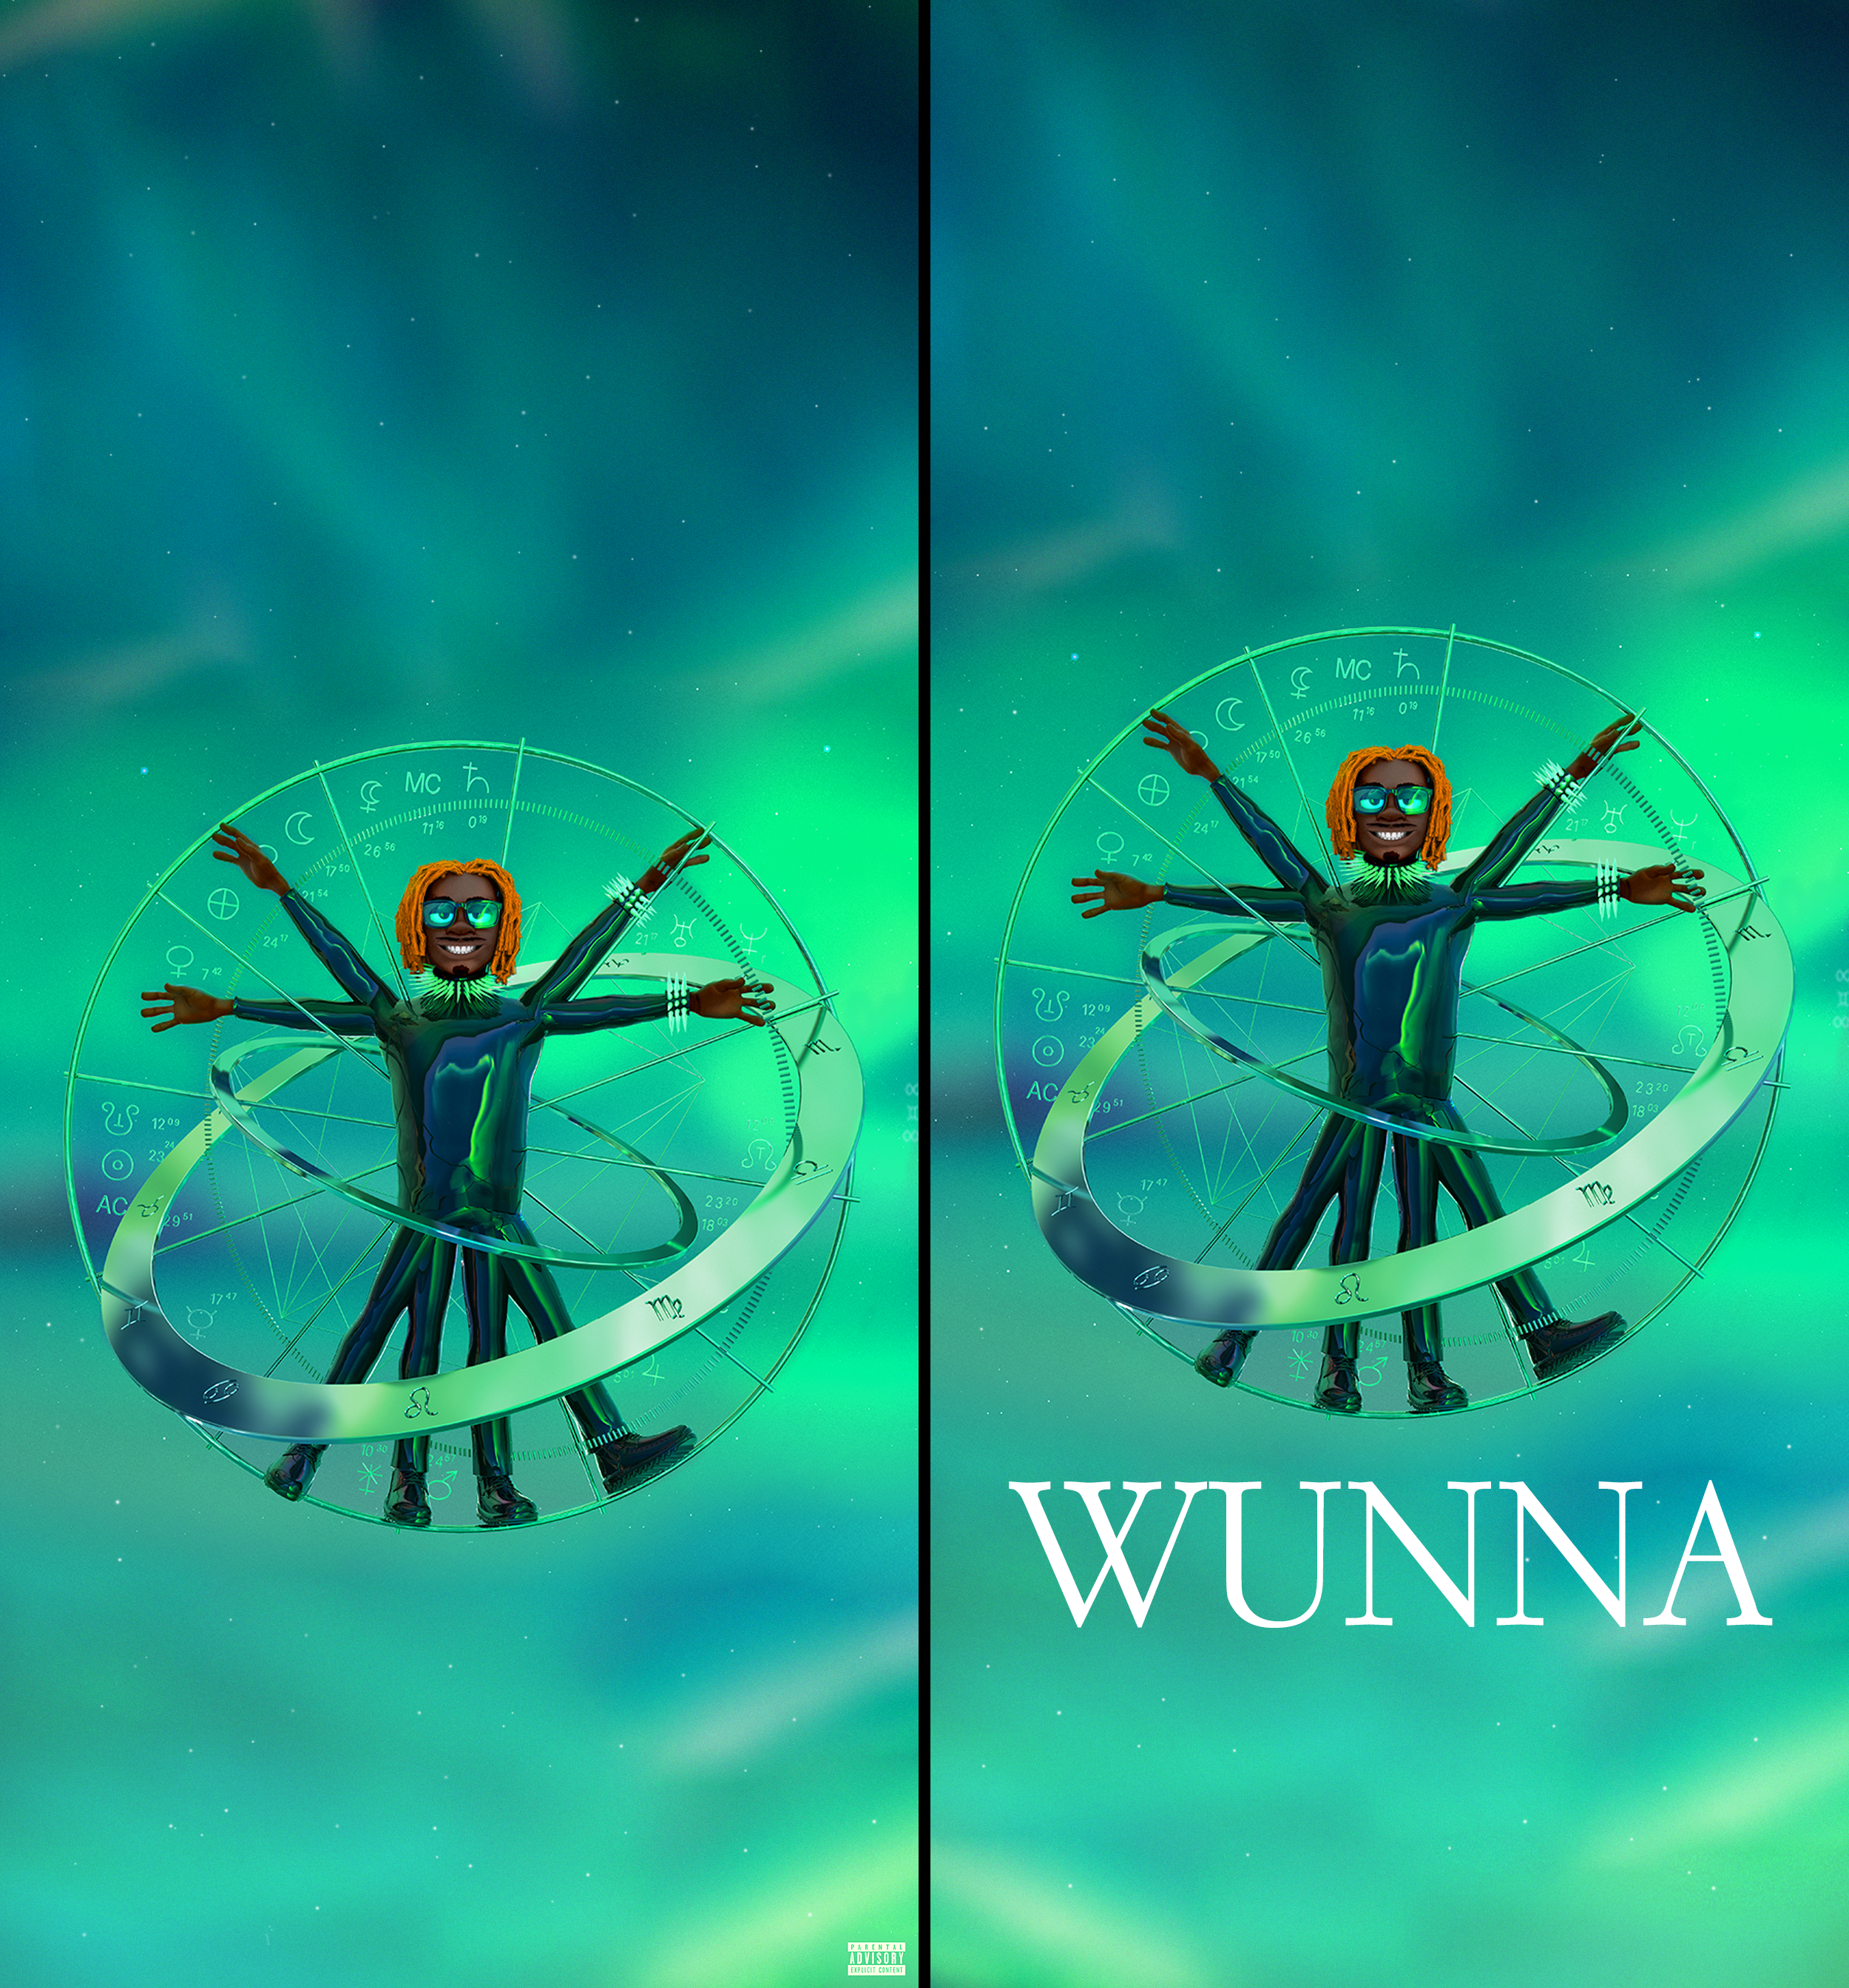 Gunna Deluxe Wallpaper made two variations of this wallpaper, one with the WUNNA title and one without, both are in the comments for downloading. REQUEST DIFFERENT SIZES IN THE COMMENTS